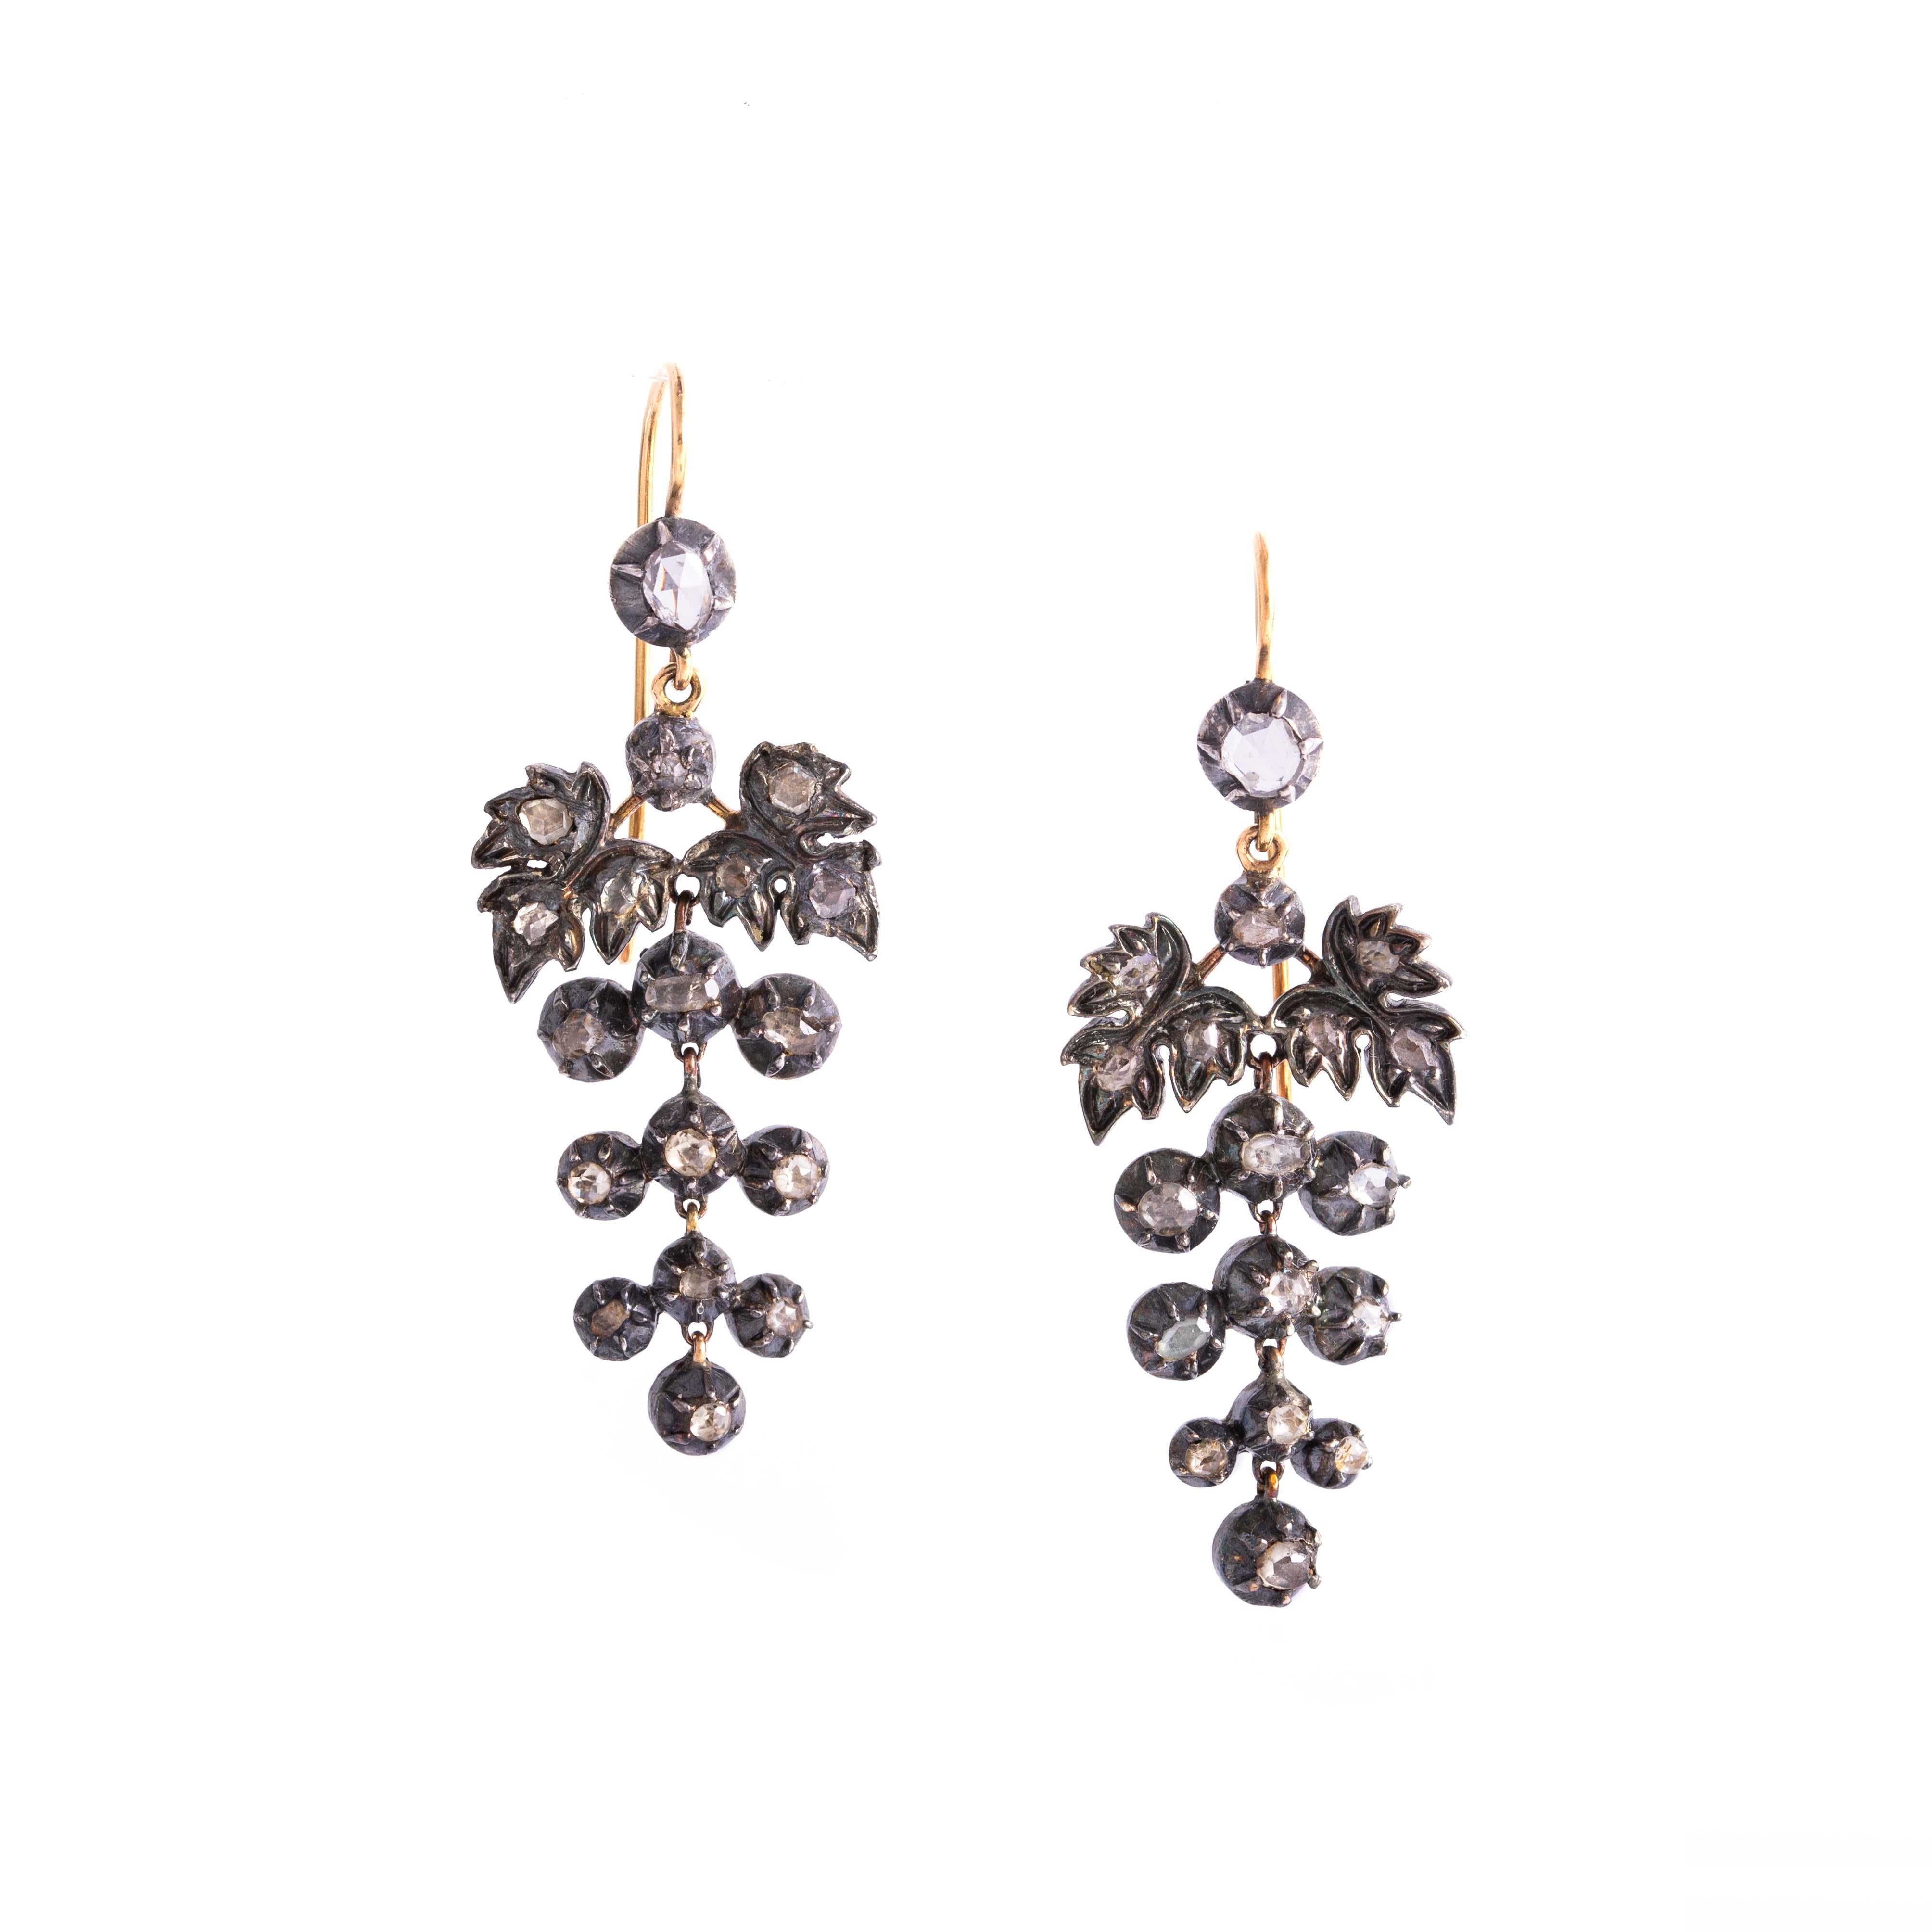 Pair of 18K gold and silver earrings depicting clusters of grapes set with rose-cut diamonds.
Height: 5.10 centimeters.
Gross weight: 14.95 grams.